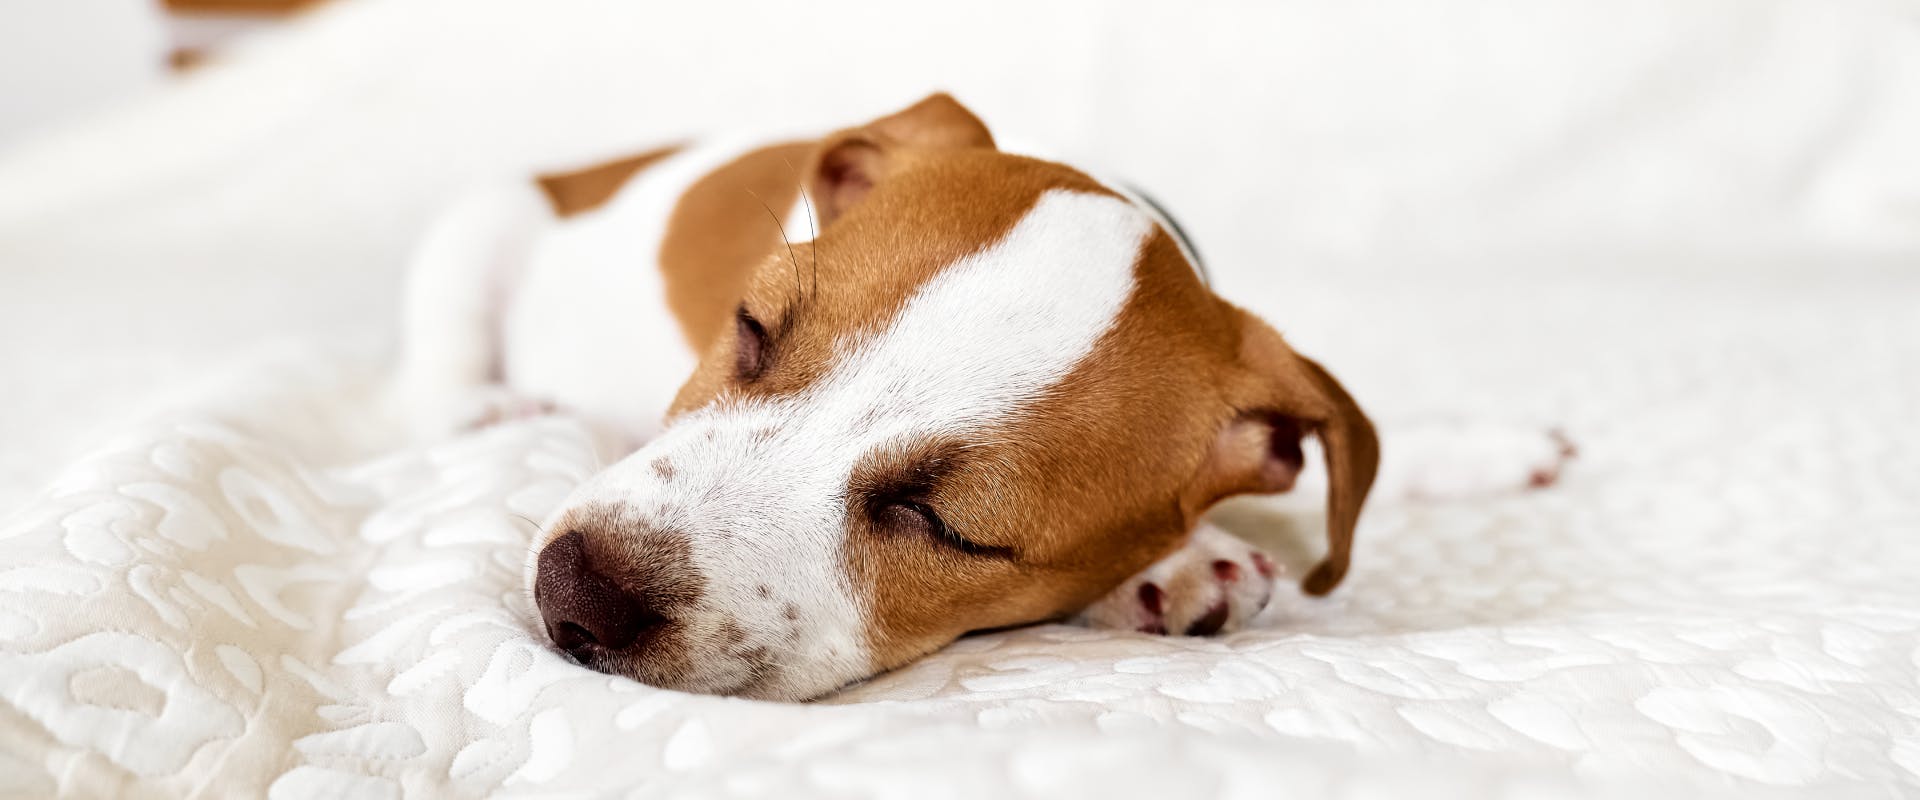 a small terrier sleeping on a soft white blanket